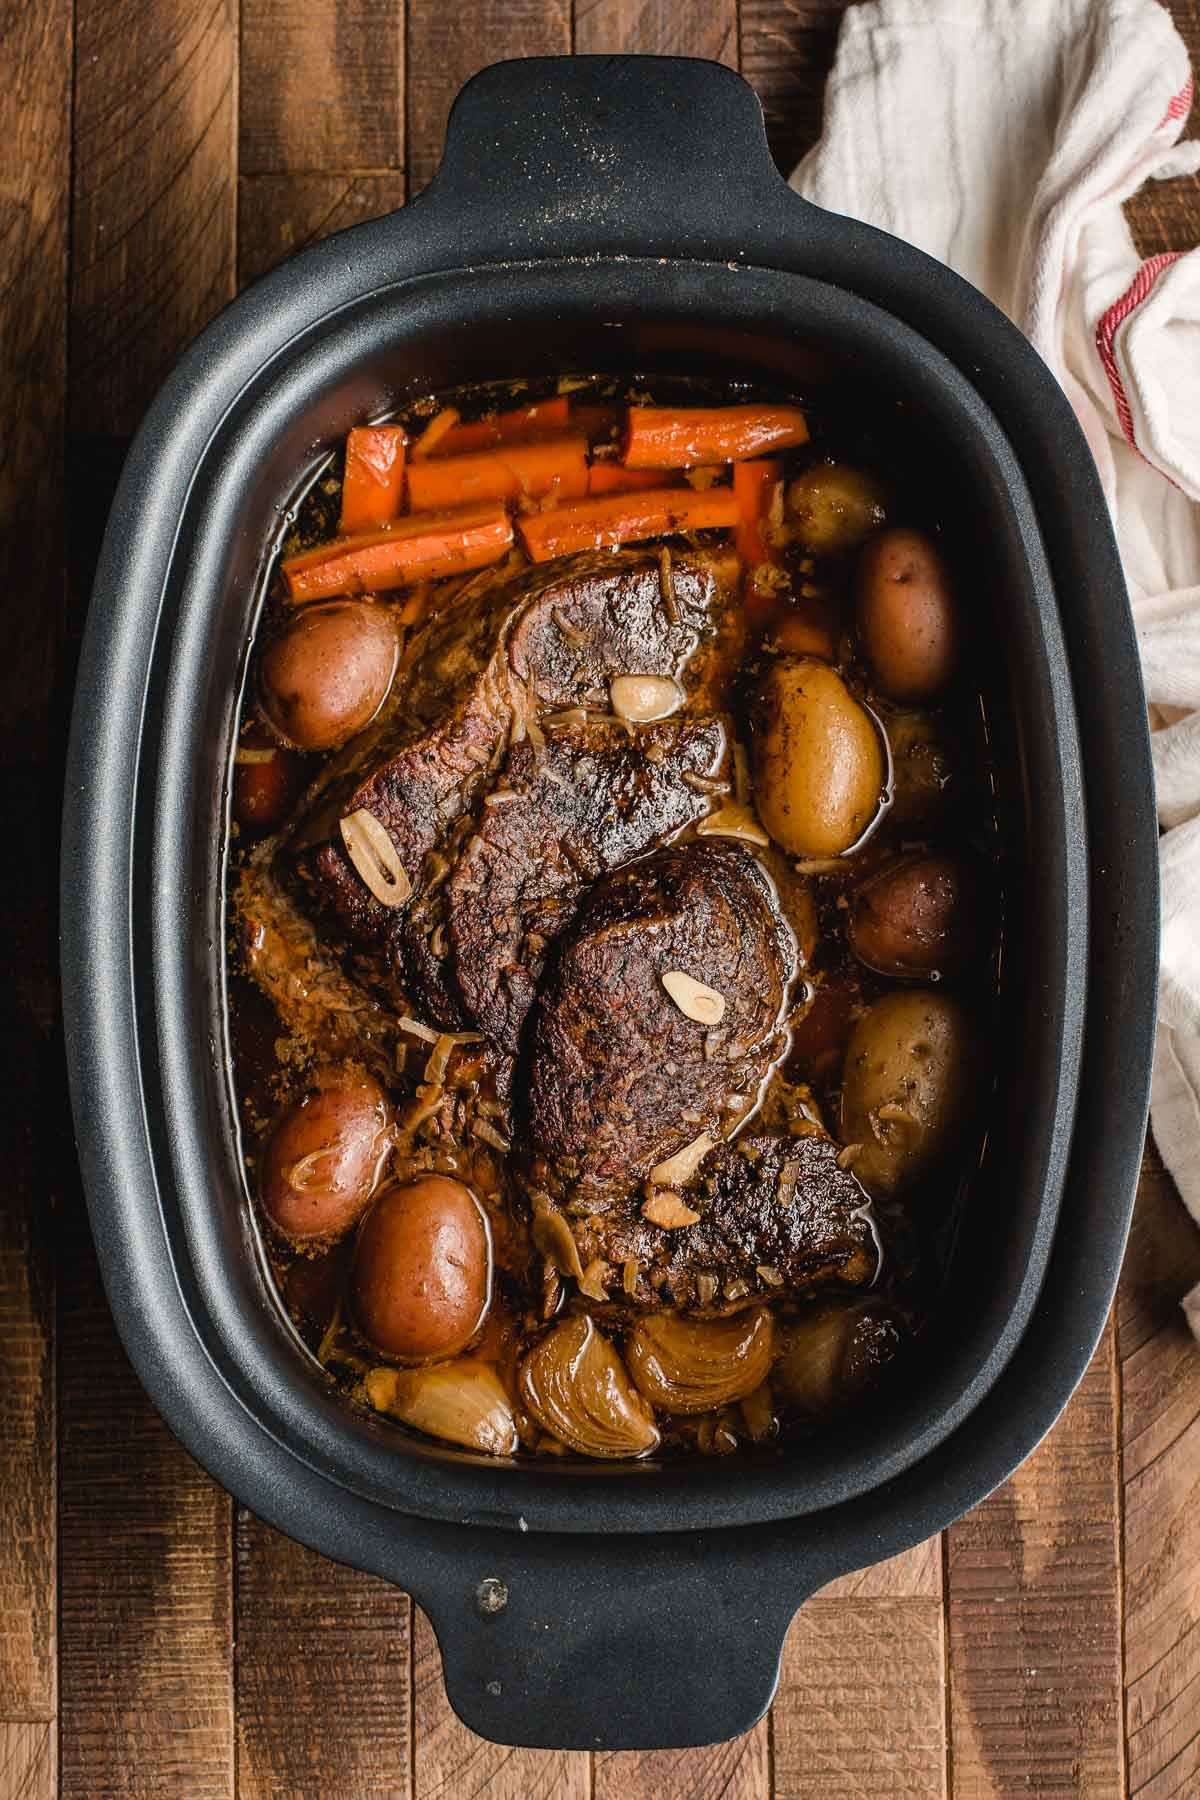 Slow cooked pot roast, potatoes, and carrots, shown in a crock pot.